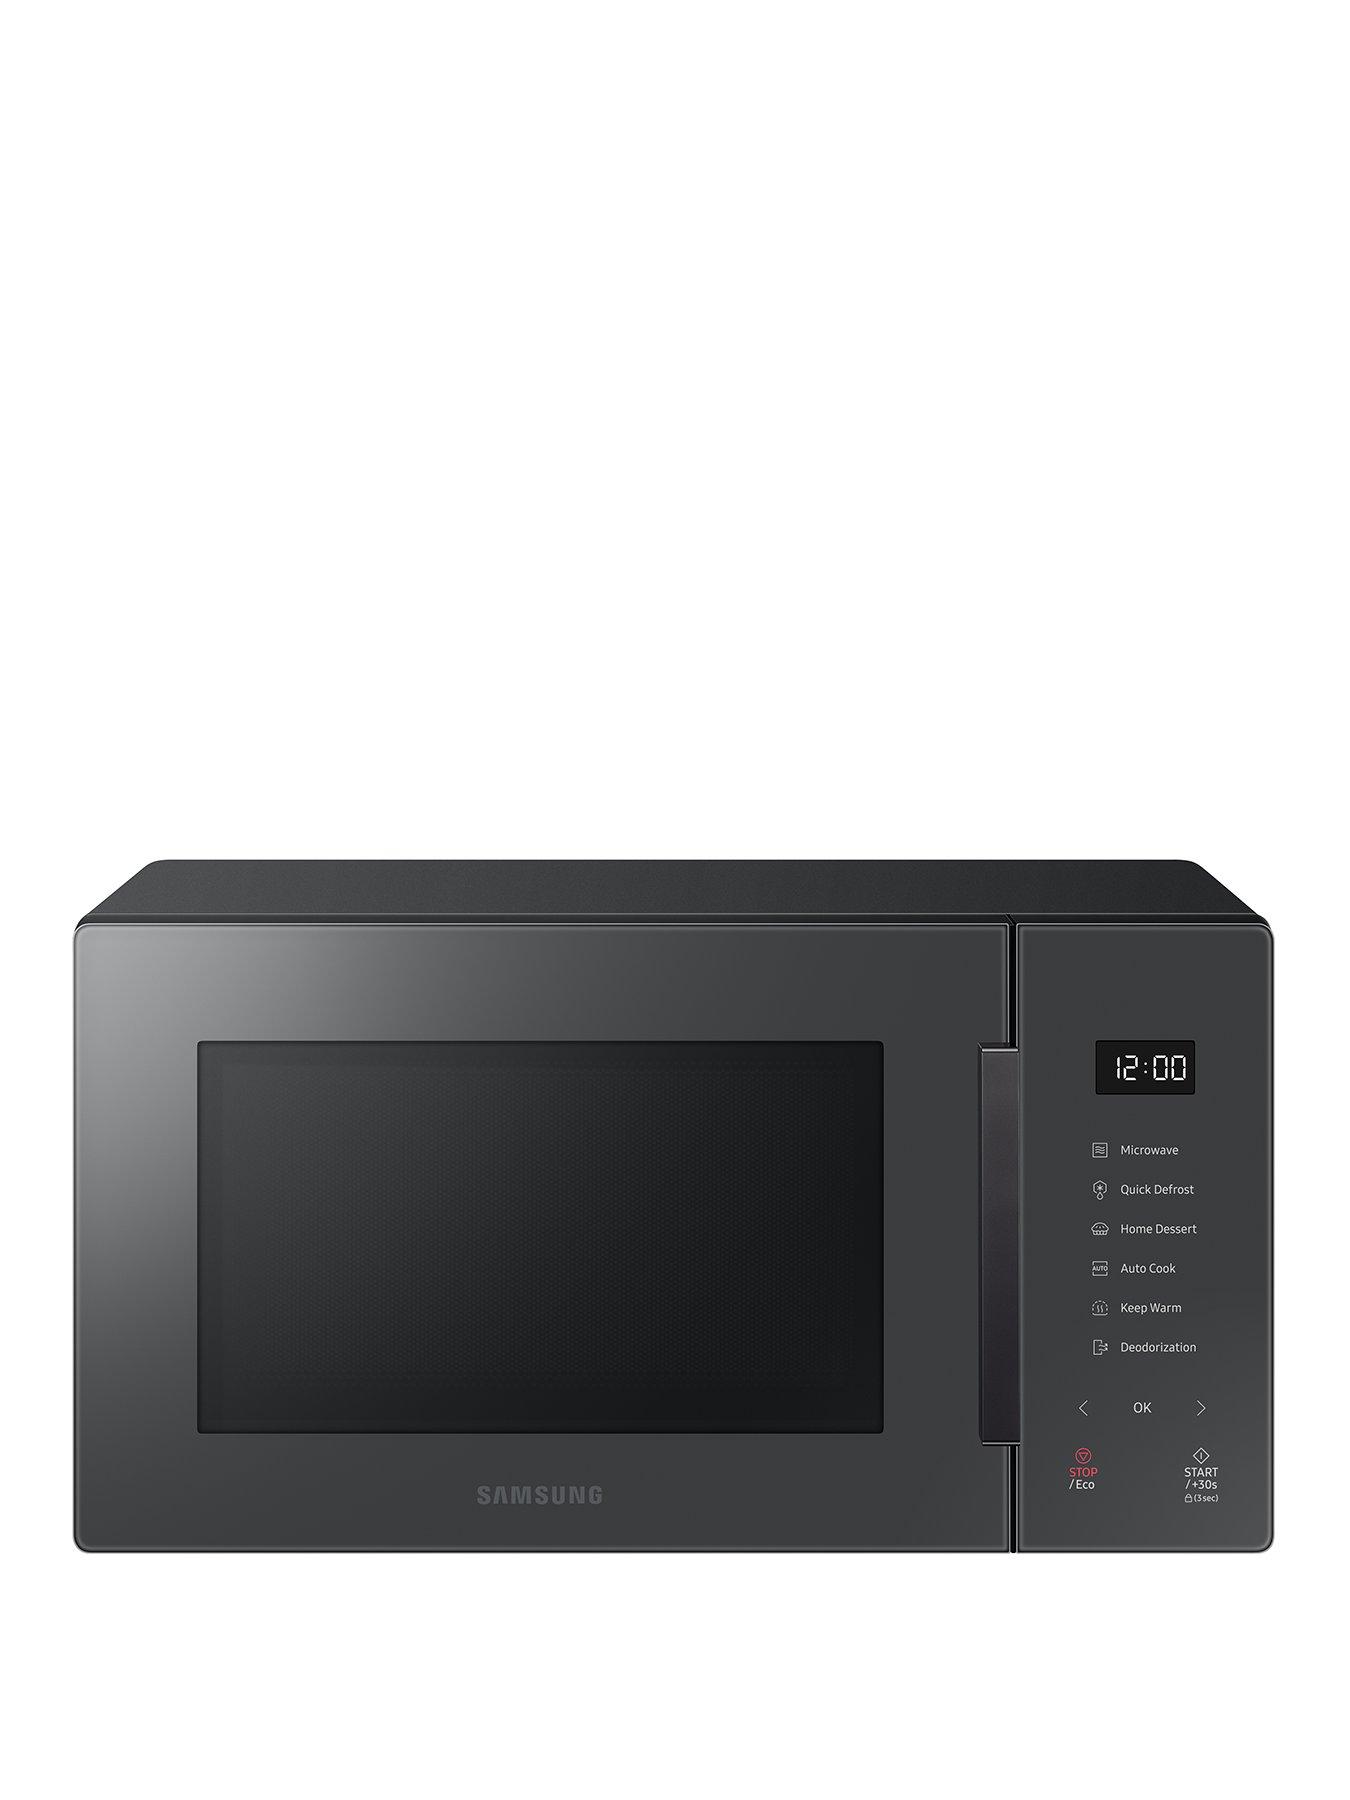 https://media.very.co.uk/i/very/VALD1_SQ1_0000000088_NO_COLOR_SLf/samsung-glass-front-ms23t5018aceu-23-litre-solo-microwave-charcoal.jpg?$180x240_retinamobilex2$&$roundel_very$&p1_img=sale_2017&p3_img=video_roundel